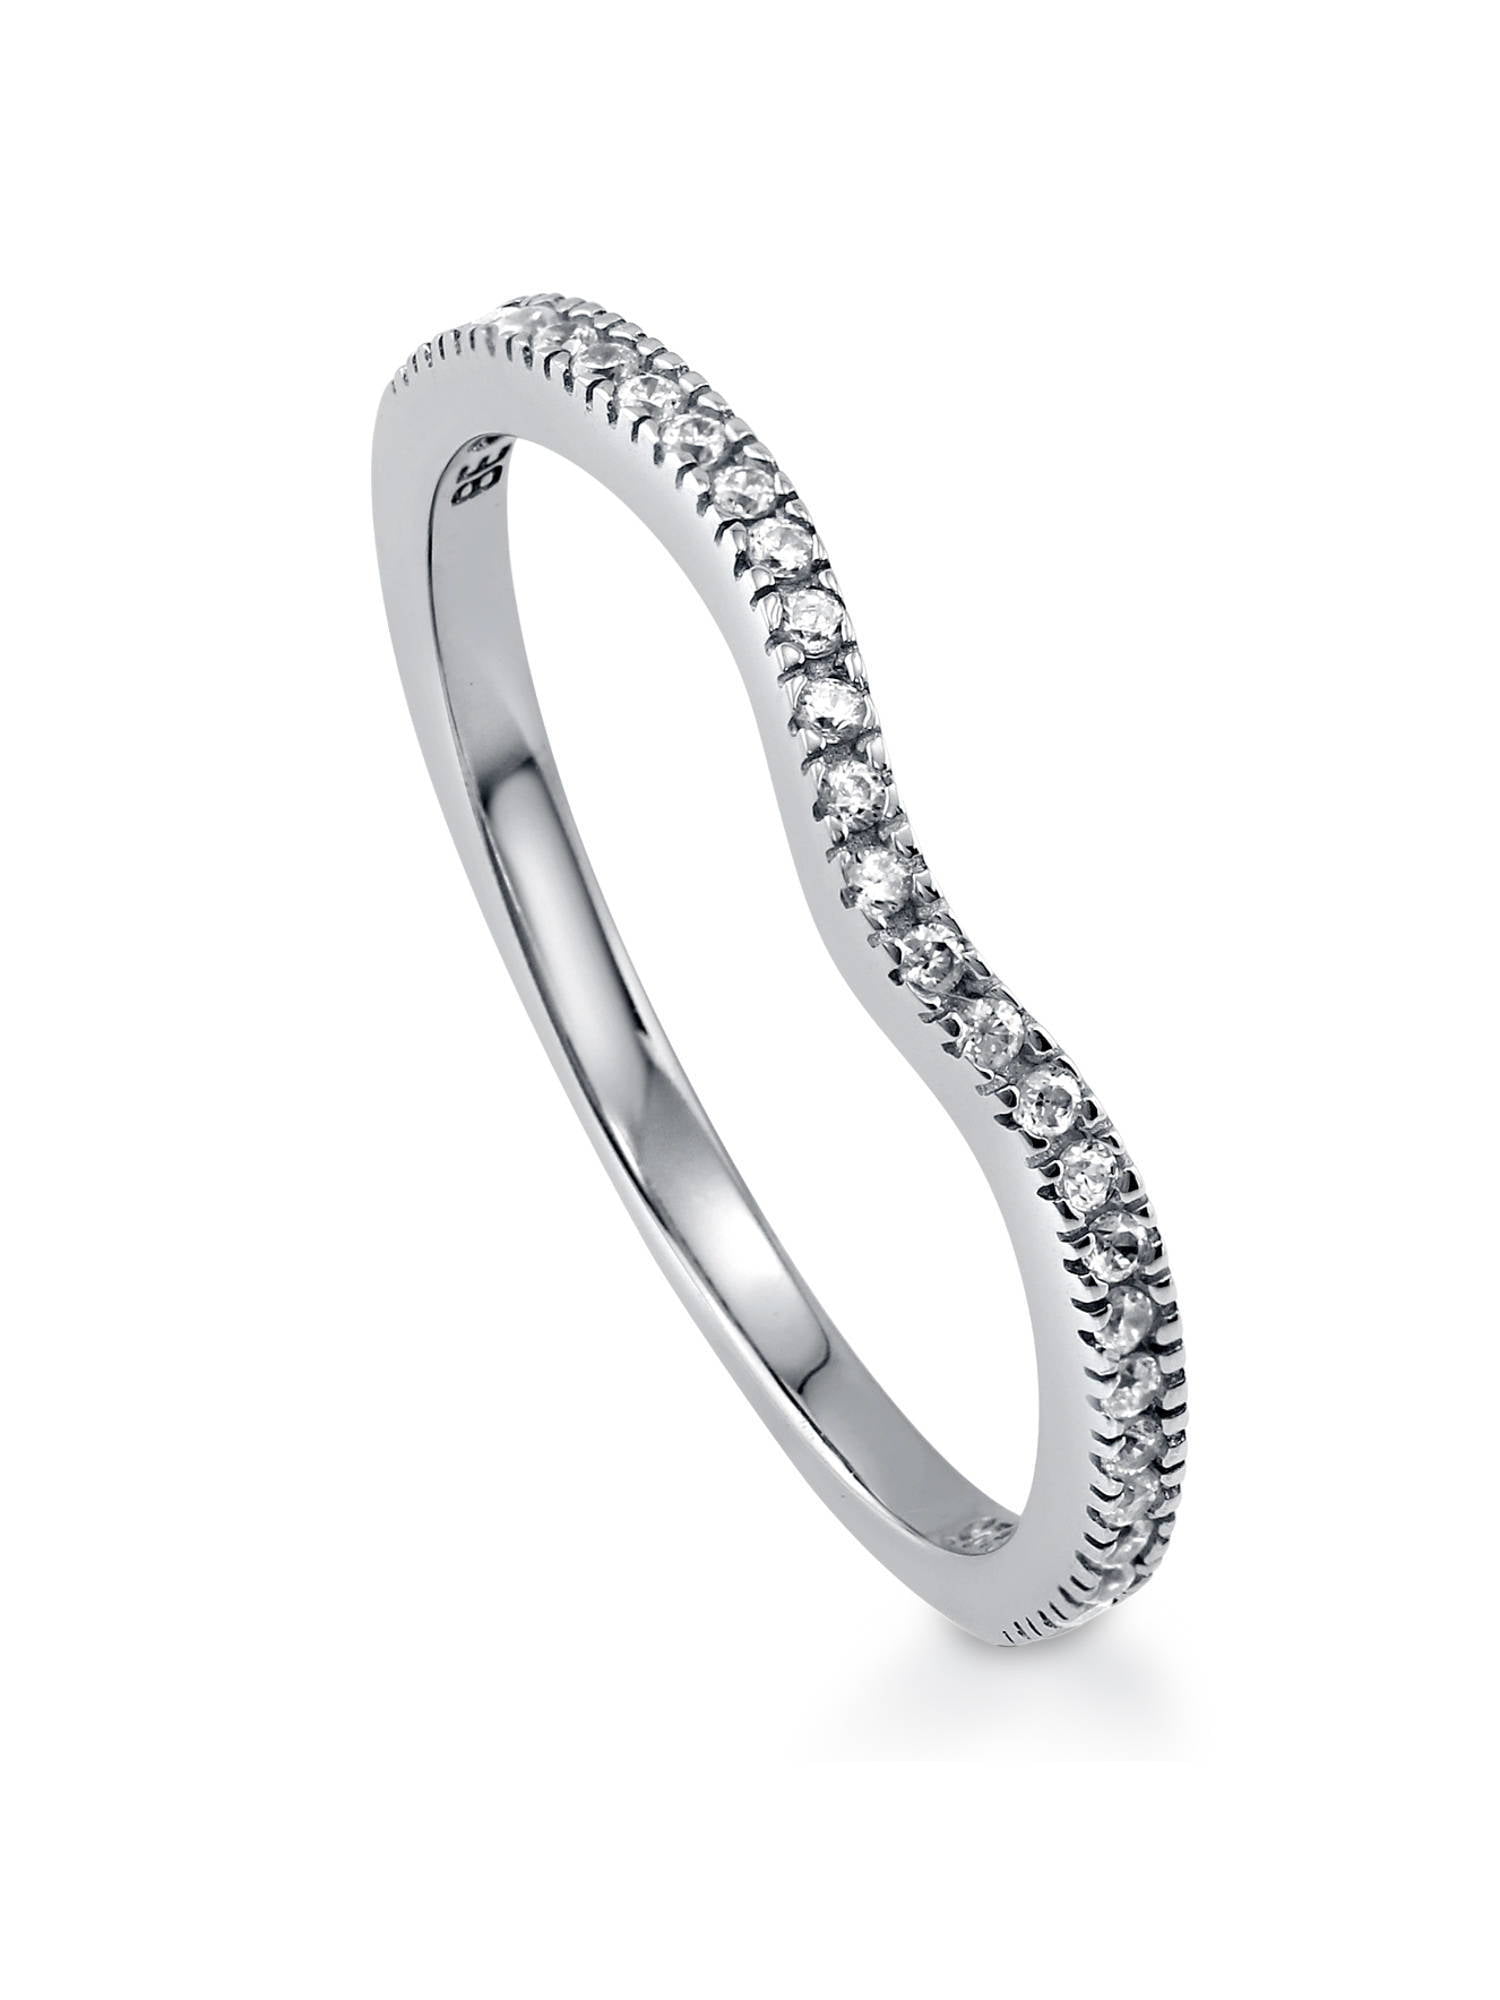 BERRICLE Rhodium Plated Sterling Silver Cubic Zirconia CZ Bubble Anniversary Stackable Eternity Ring